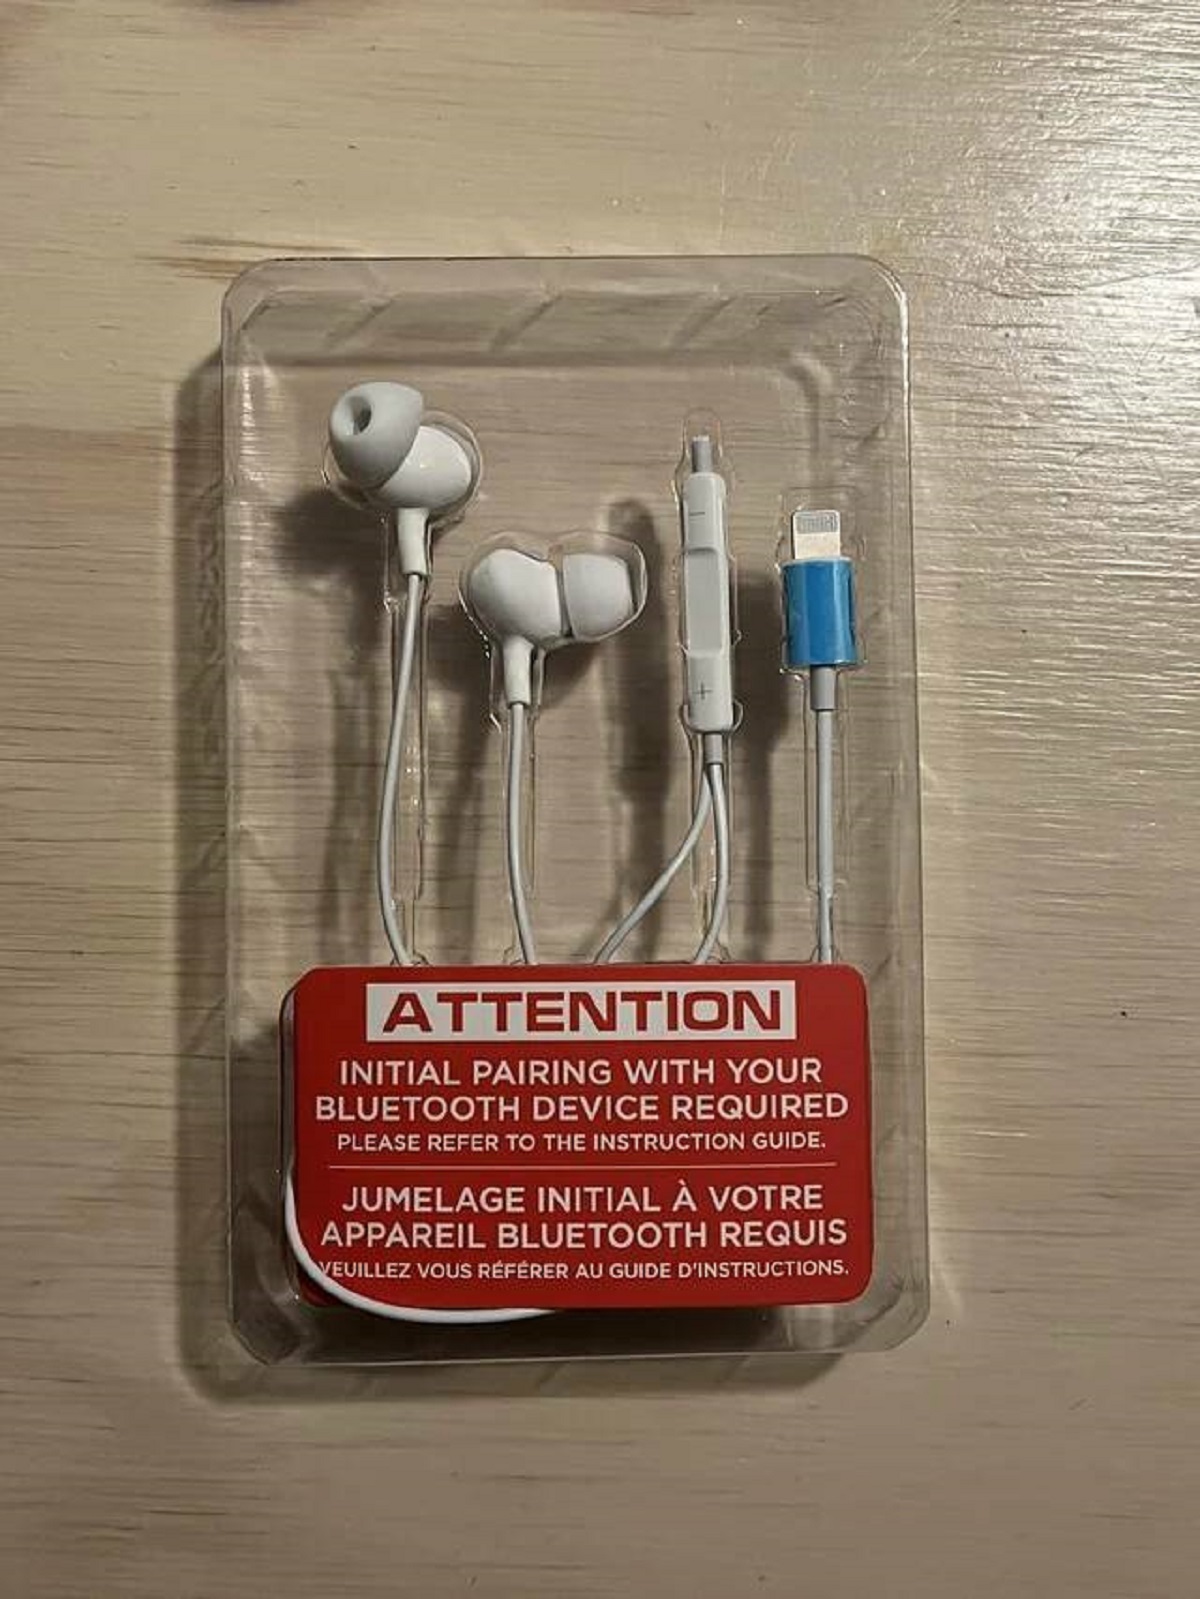 headphones - Tes Attention Initial Pairing With Your Bluetooth Device Required Please Refer To The Instruction Guide. Jumelage Initial Votre Appareil Bluetooth Requis Veuillez Vous Rfrer Au Guide D'Instructions.